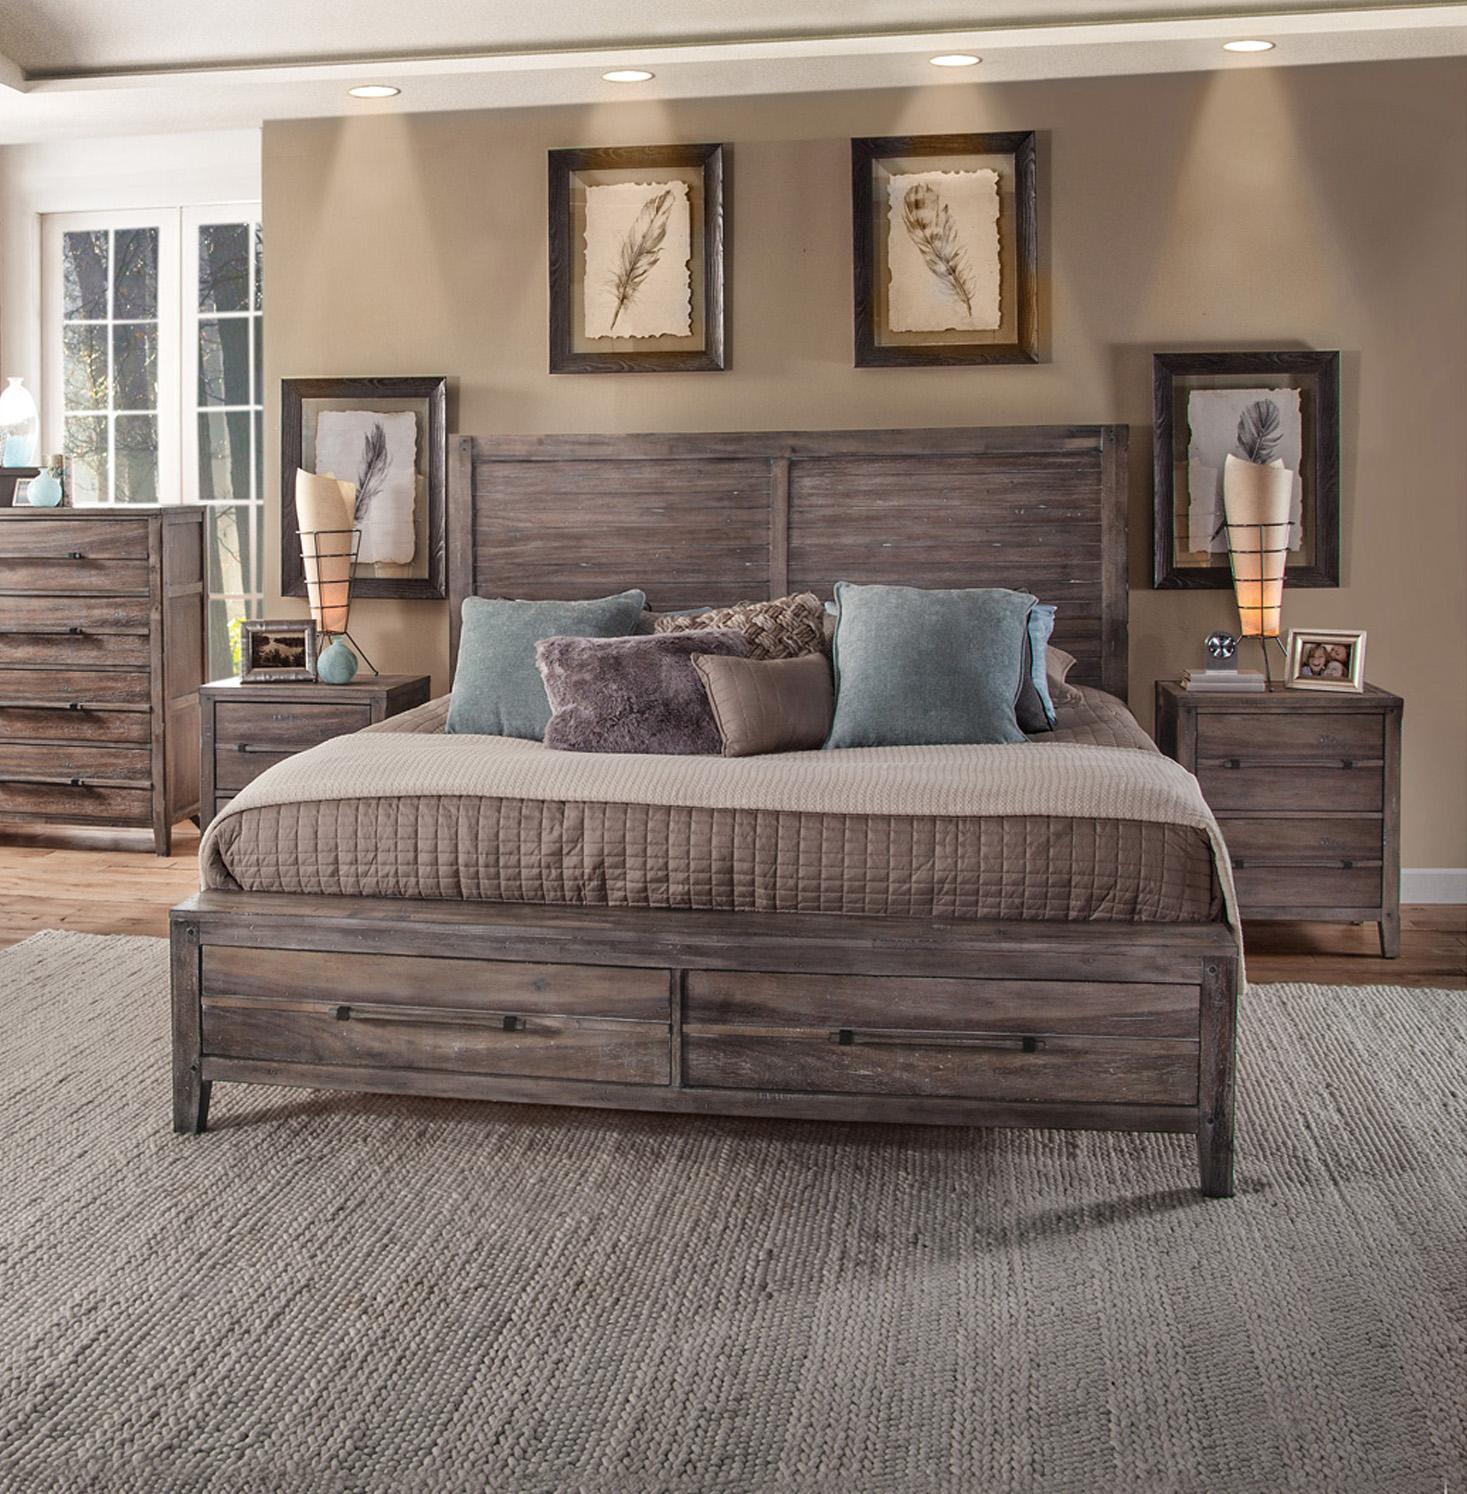 

    
American Woodcrafters AURORA 2800-50PNST Panel Bedroom Set Driftwood/Gray 2800-QPNST-4PC
